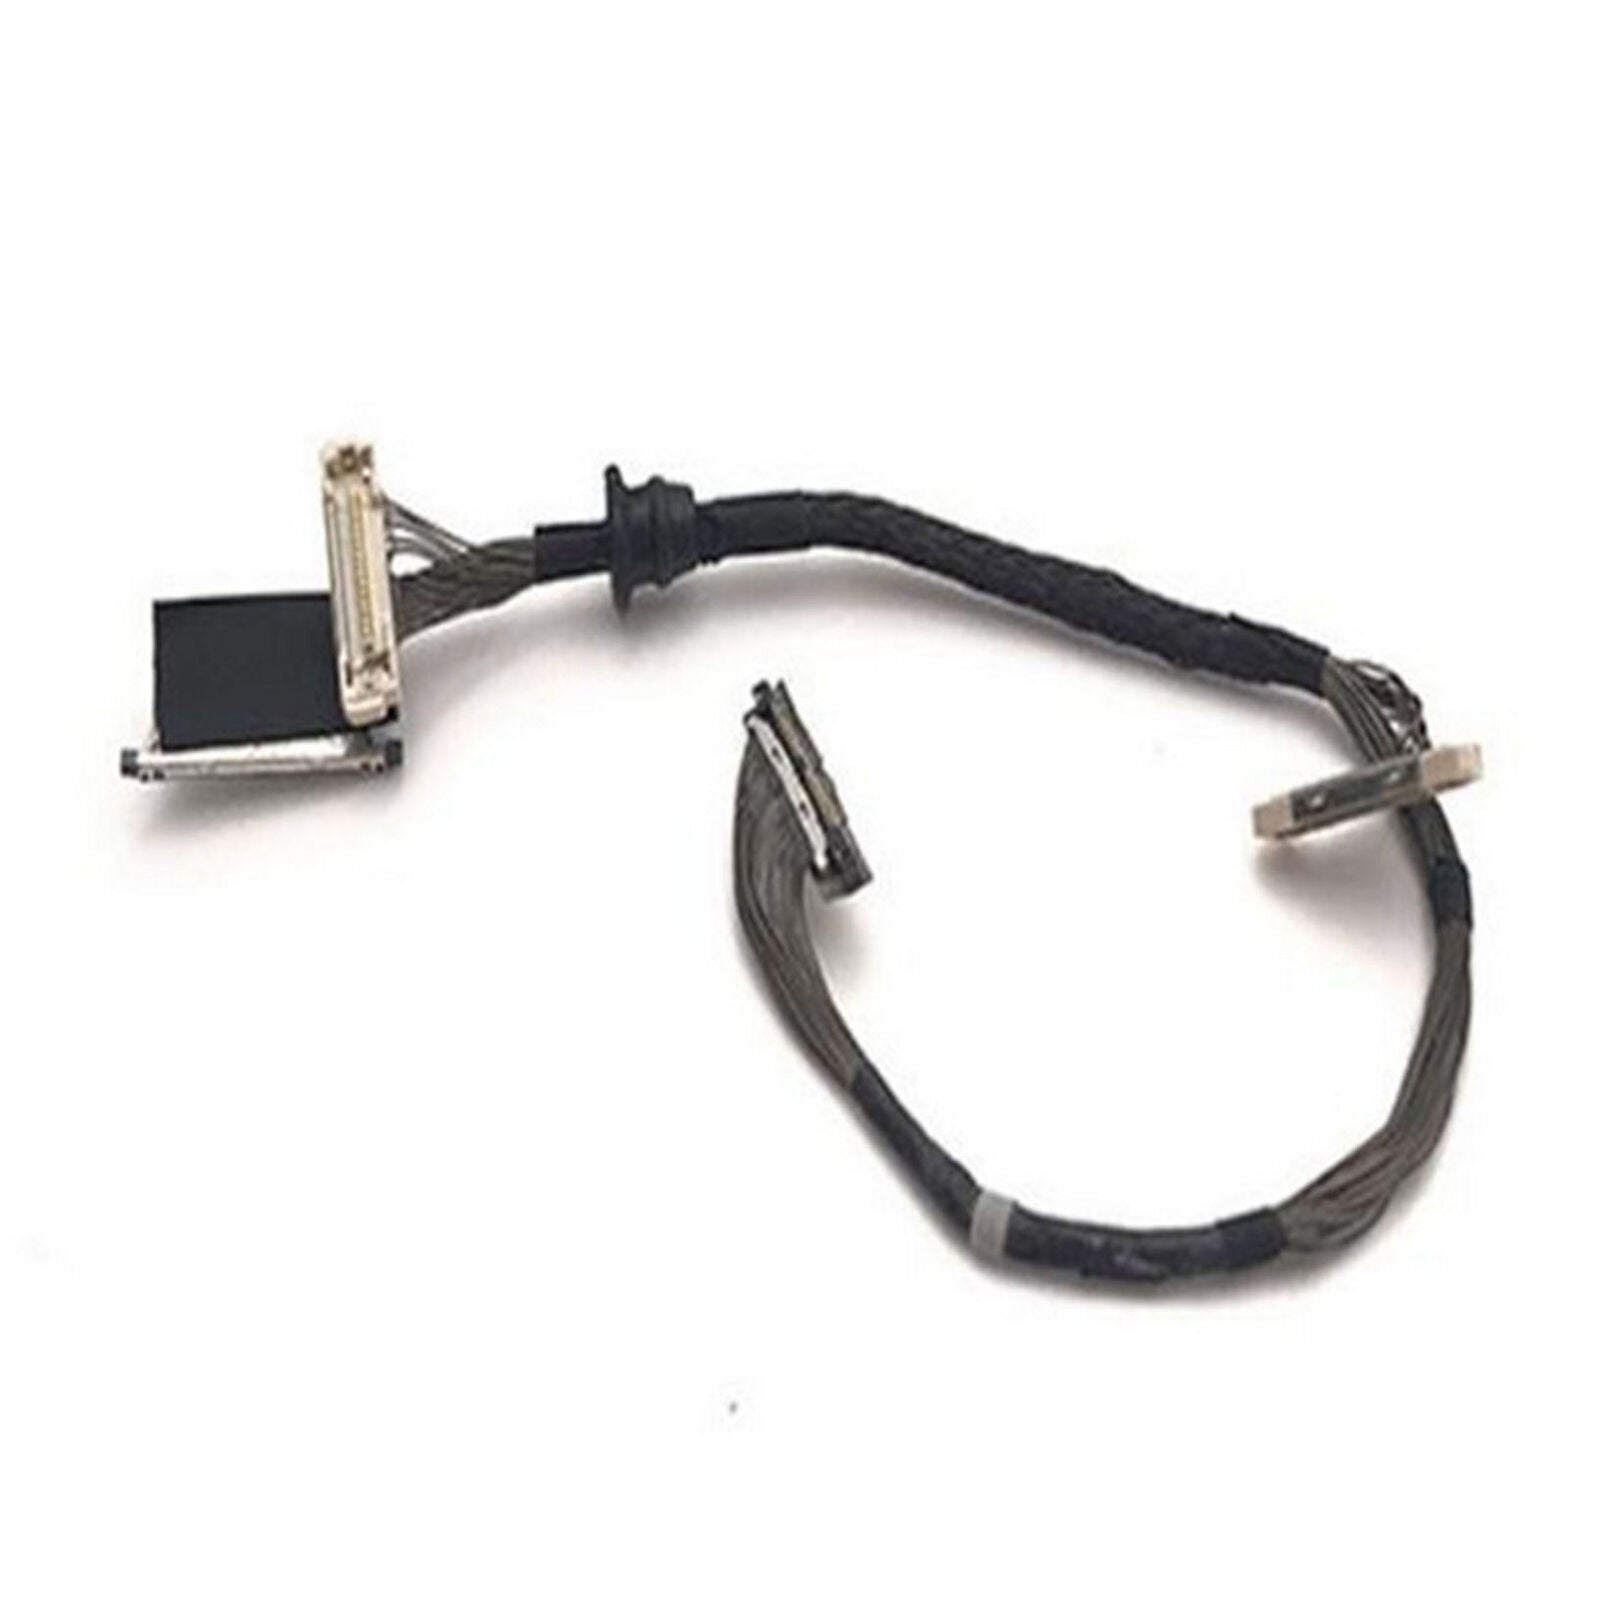 Gimbal Camera Video Signal Line Cable Transmission Wire Part for DJI Spark Drone